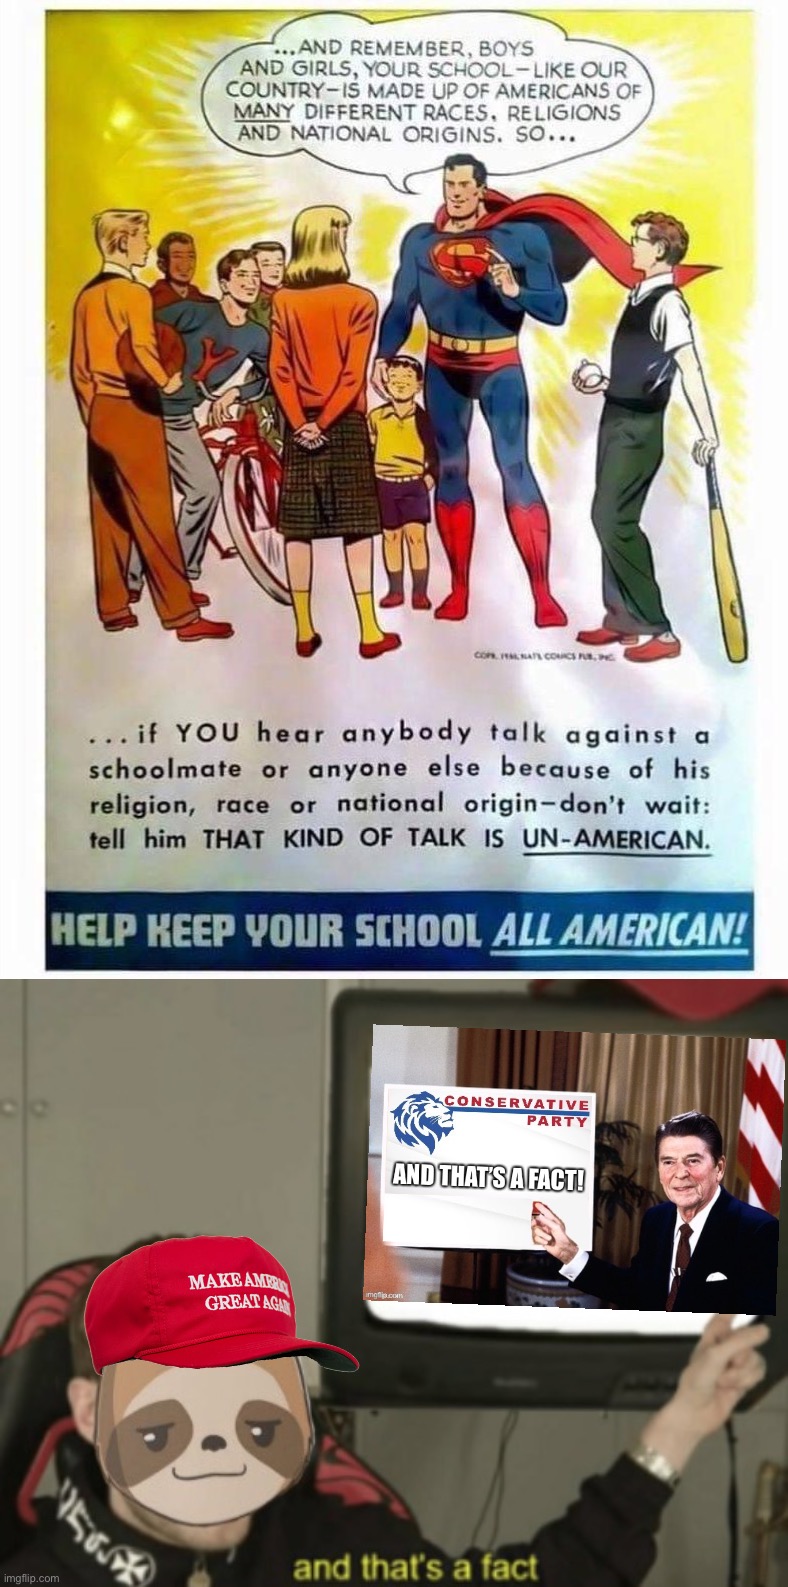 Down with Anglophobia! #WWSMD #VoteConservativeParty | image tagged in 1950s anti-racist superman,sloth and that s a fact,superman,anglophobia,conservative party,vote conservative party | made w/ Imgflip meme maker